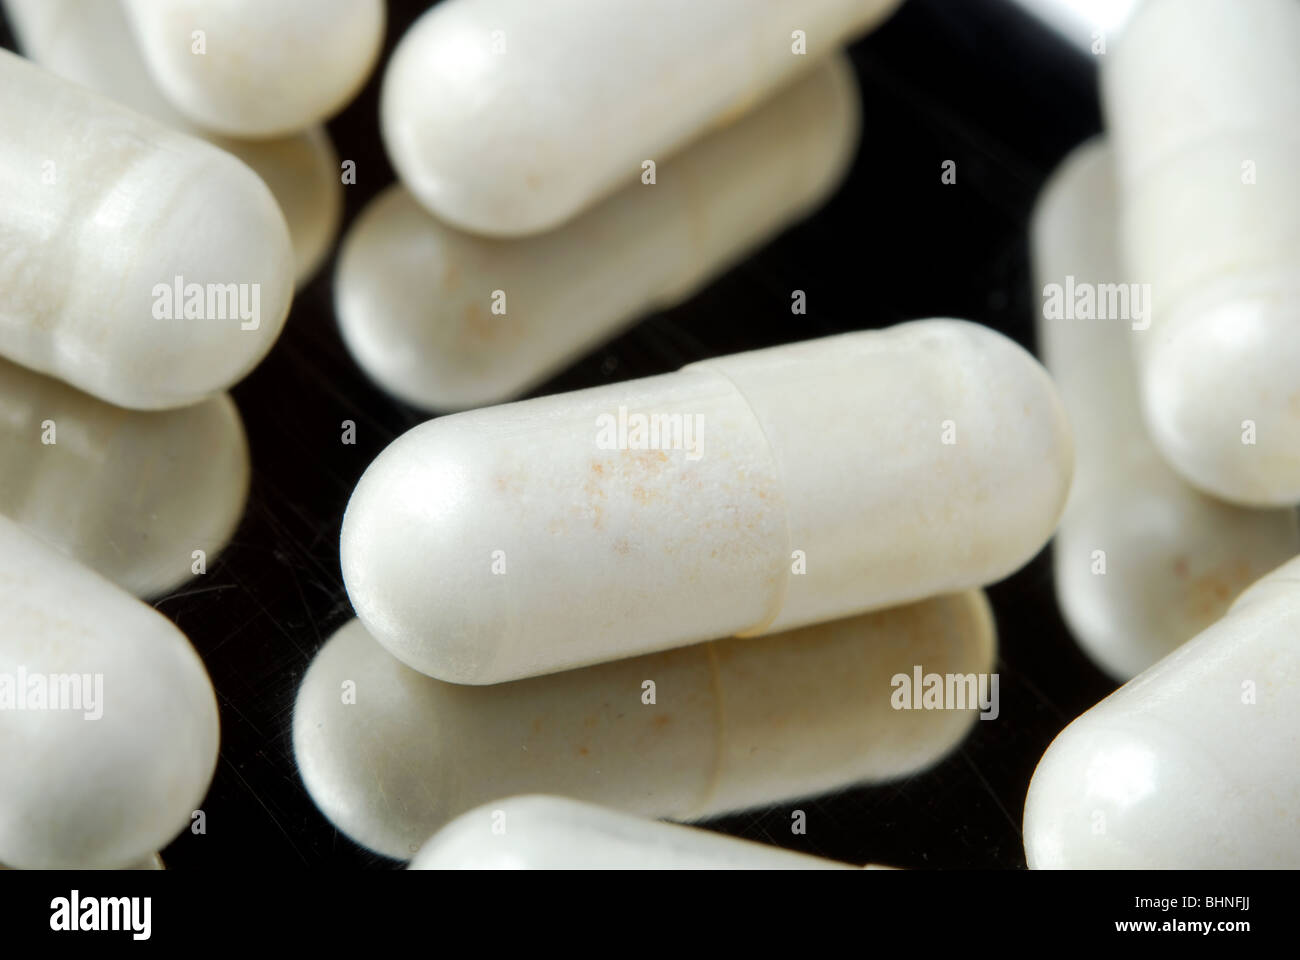 Probiotic capsules for intestinal bacterial support. UK, 2010. Stock Photo